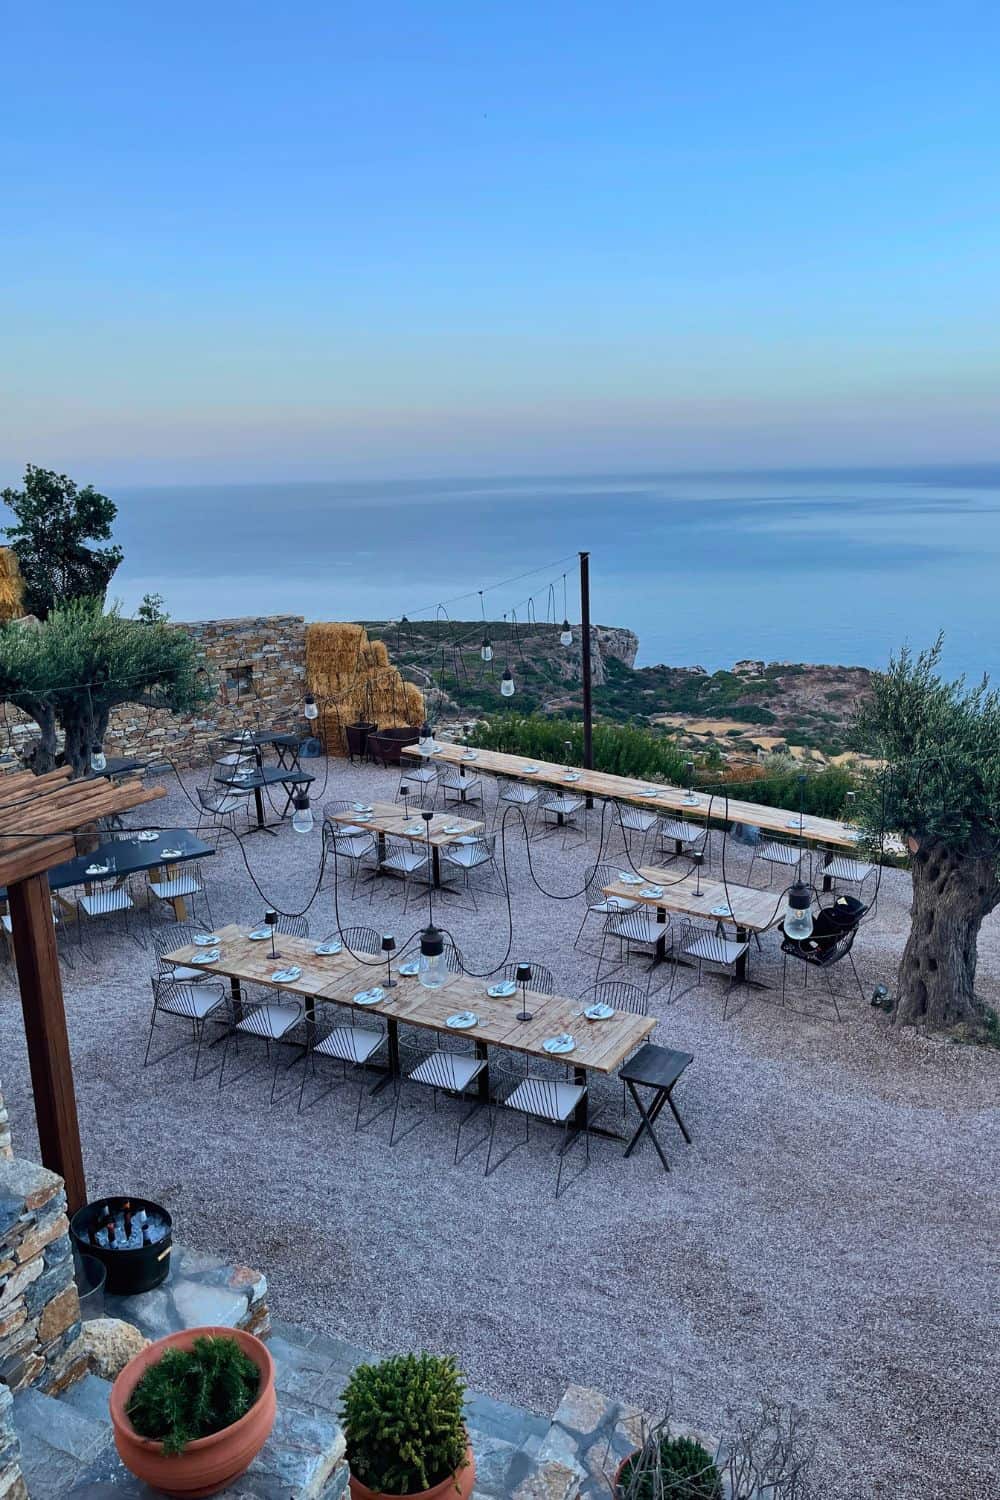 An open-air restaurant set on a hill, with an expansive view of the sea at twilight, featuring rows of simple yet elegant tables and chairs spread out on a gravel-covered terrace